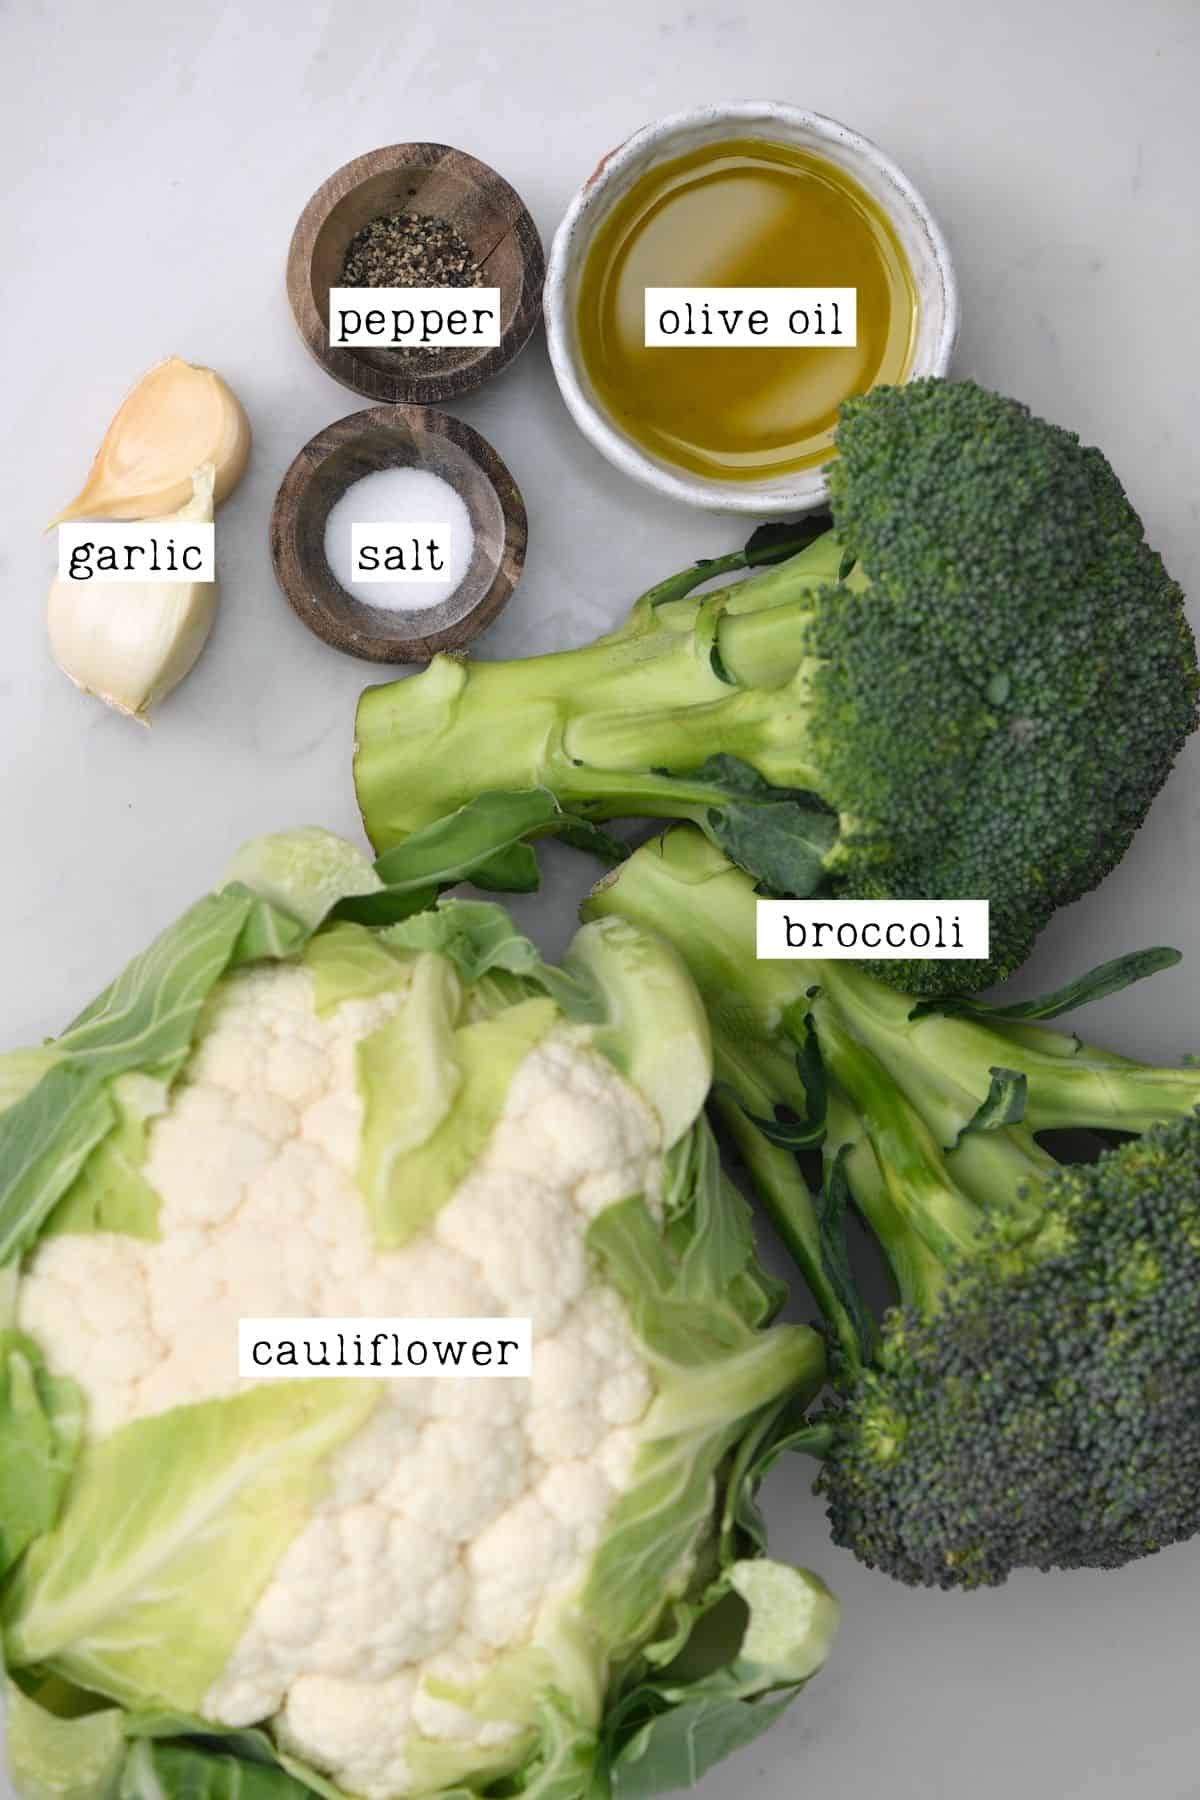 Ingredients for roasted broccoli and cauliflower